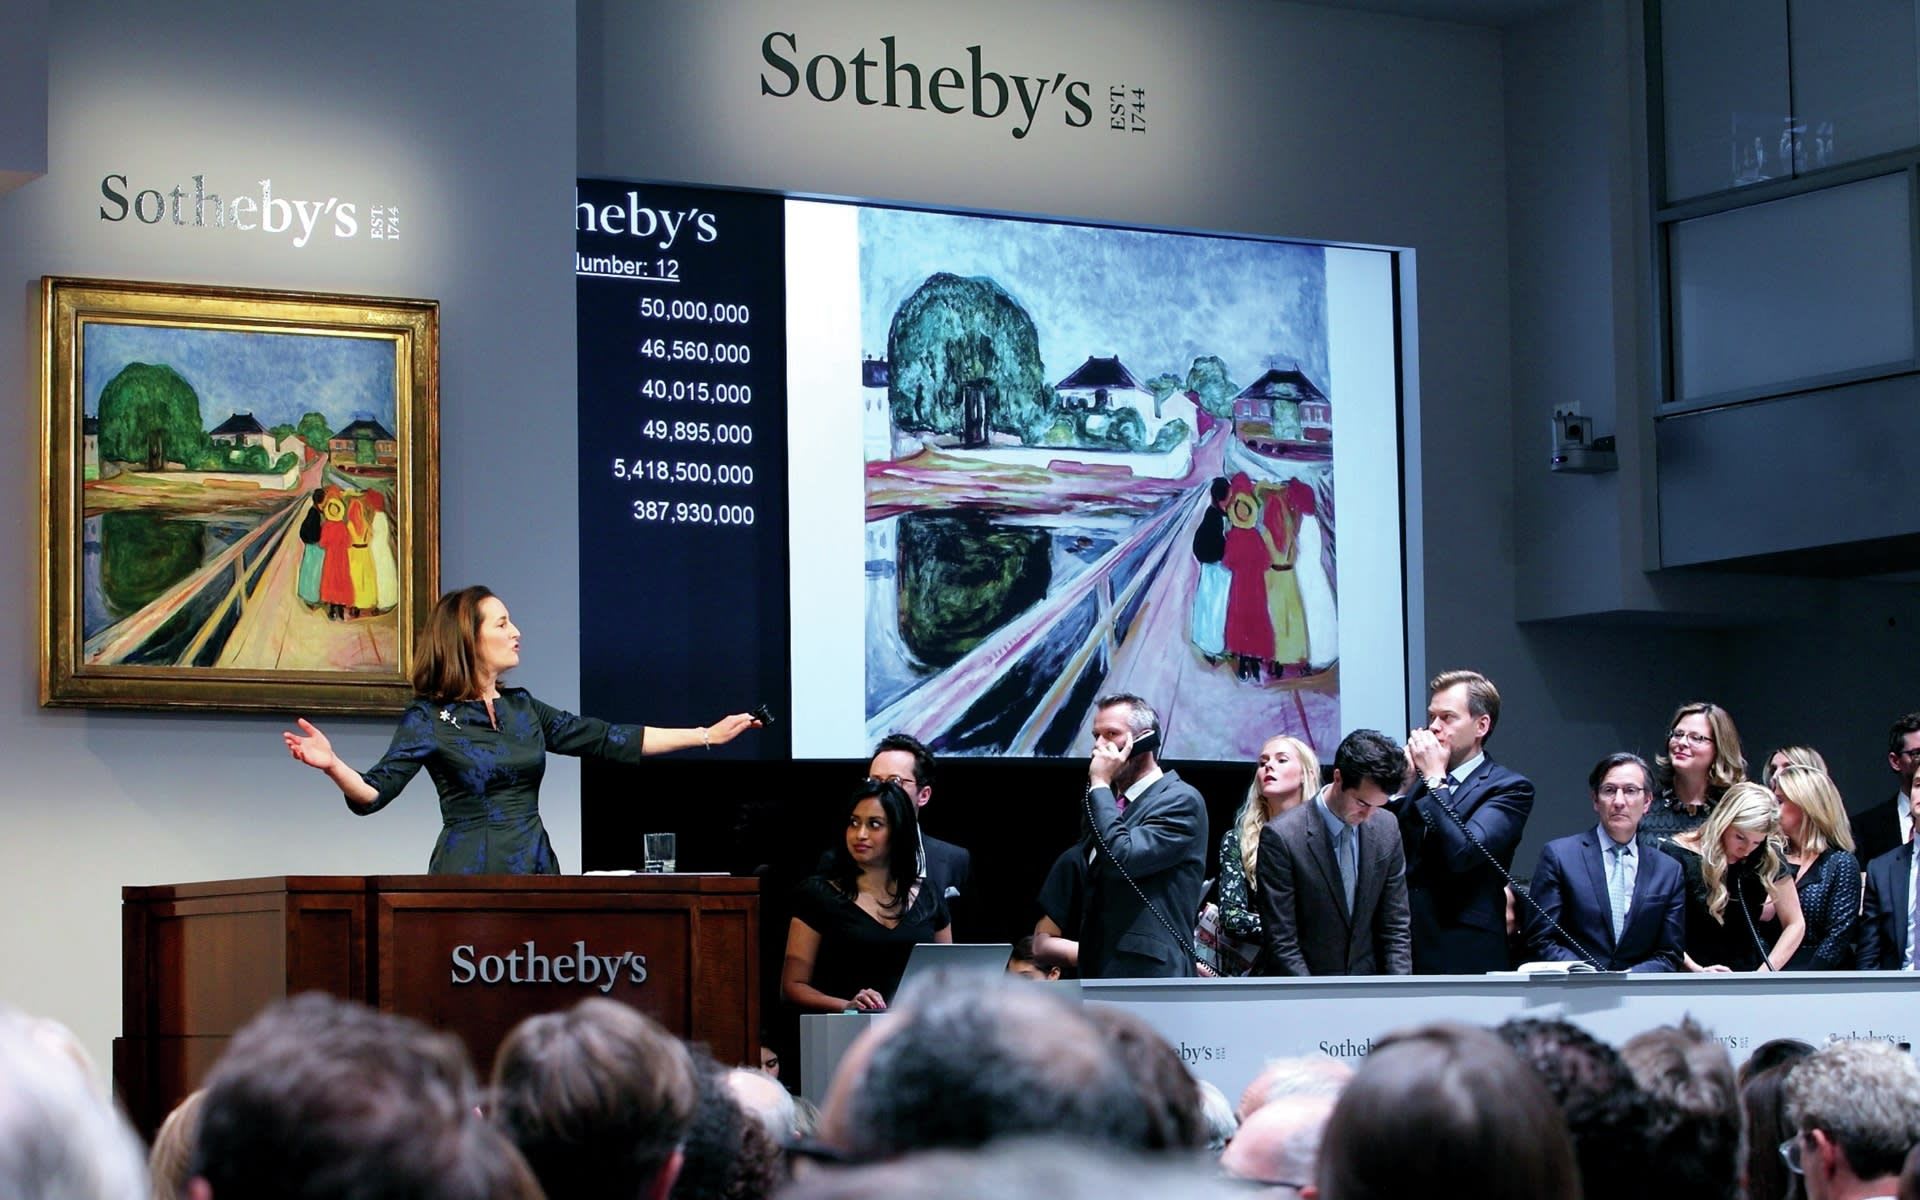 Sotheby's Auction House image